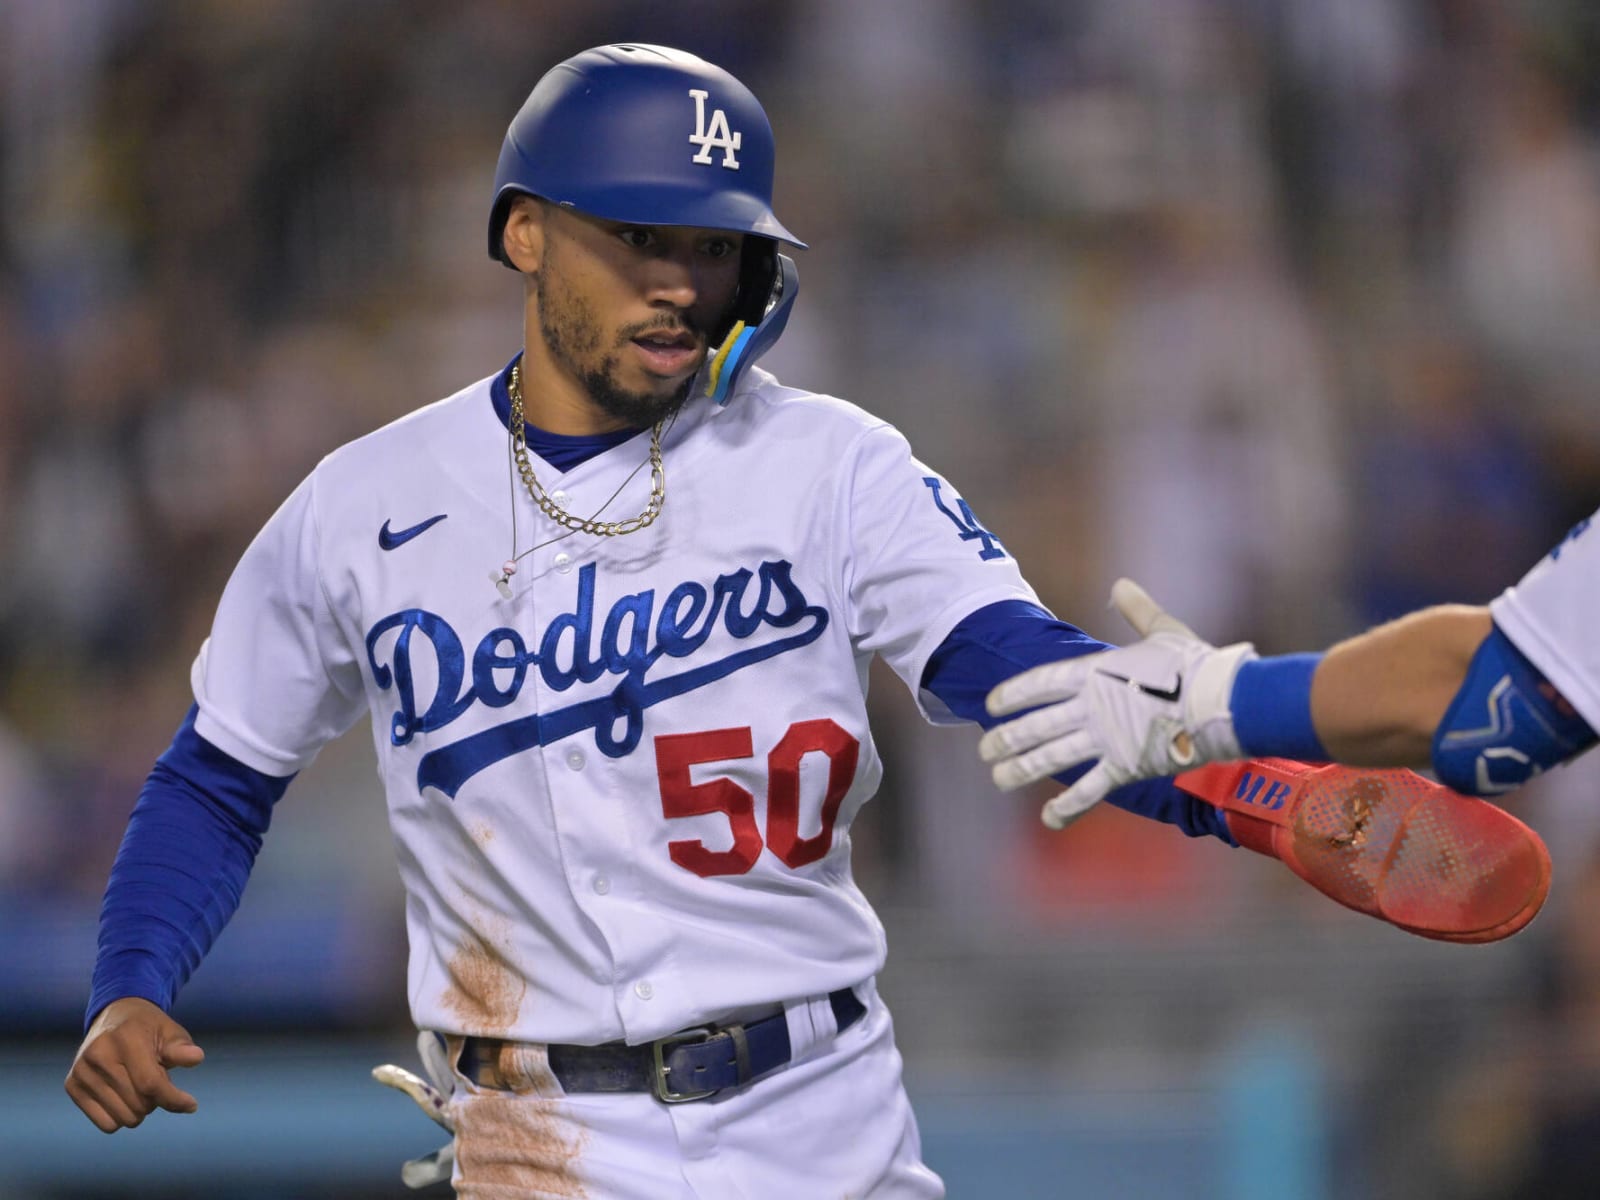 Dodgers activate LHP Andrew Heaney, place RF Mookie Betts on IL